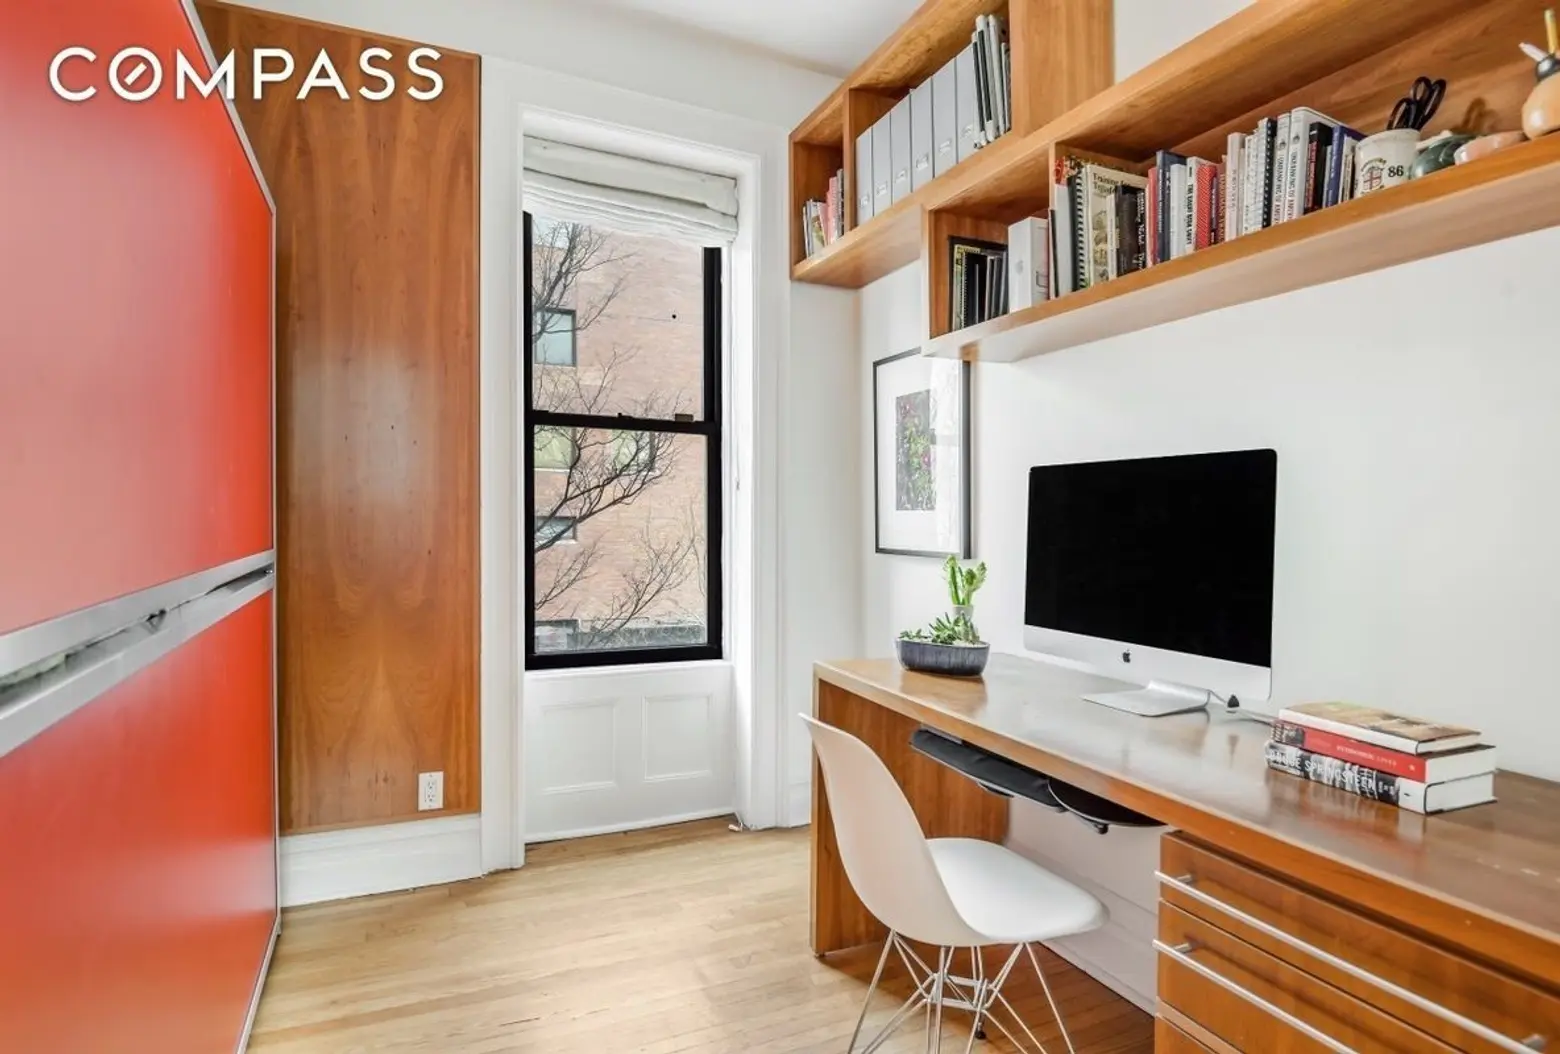 510 7th Street, cool listings, park slope, townhouses, outdoor spaces,